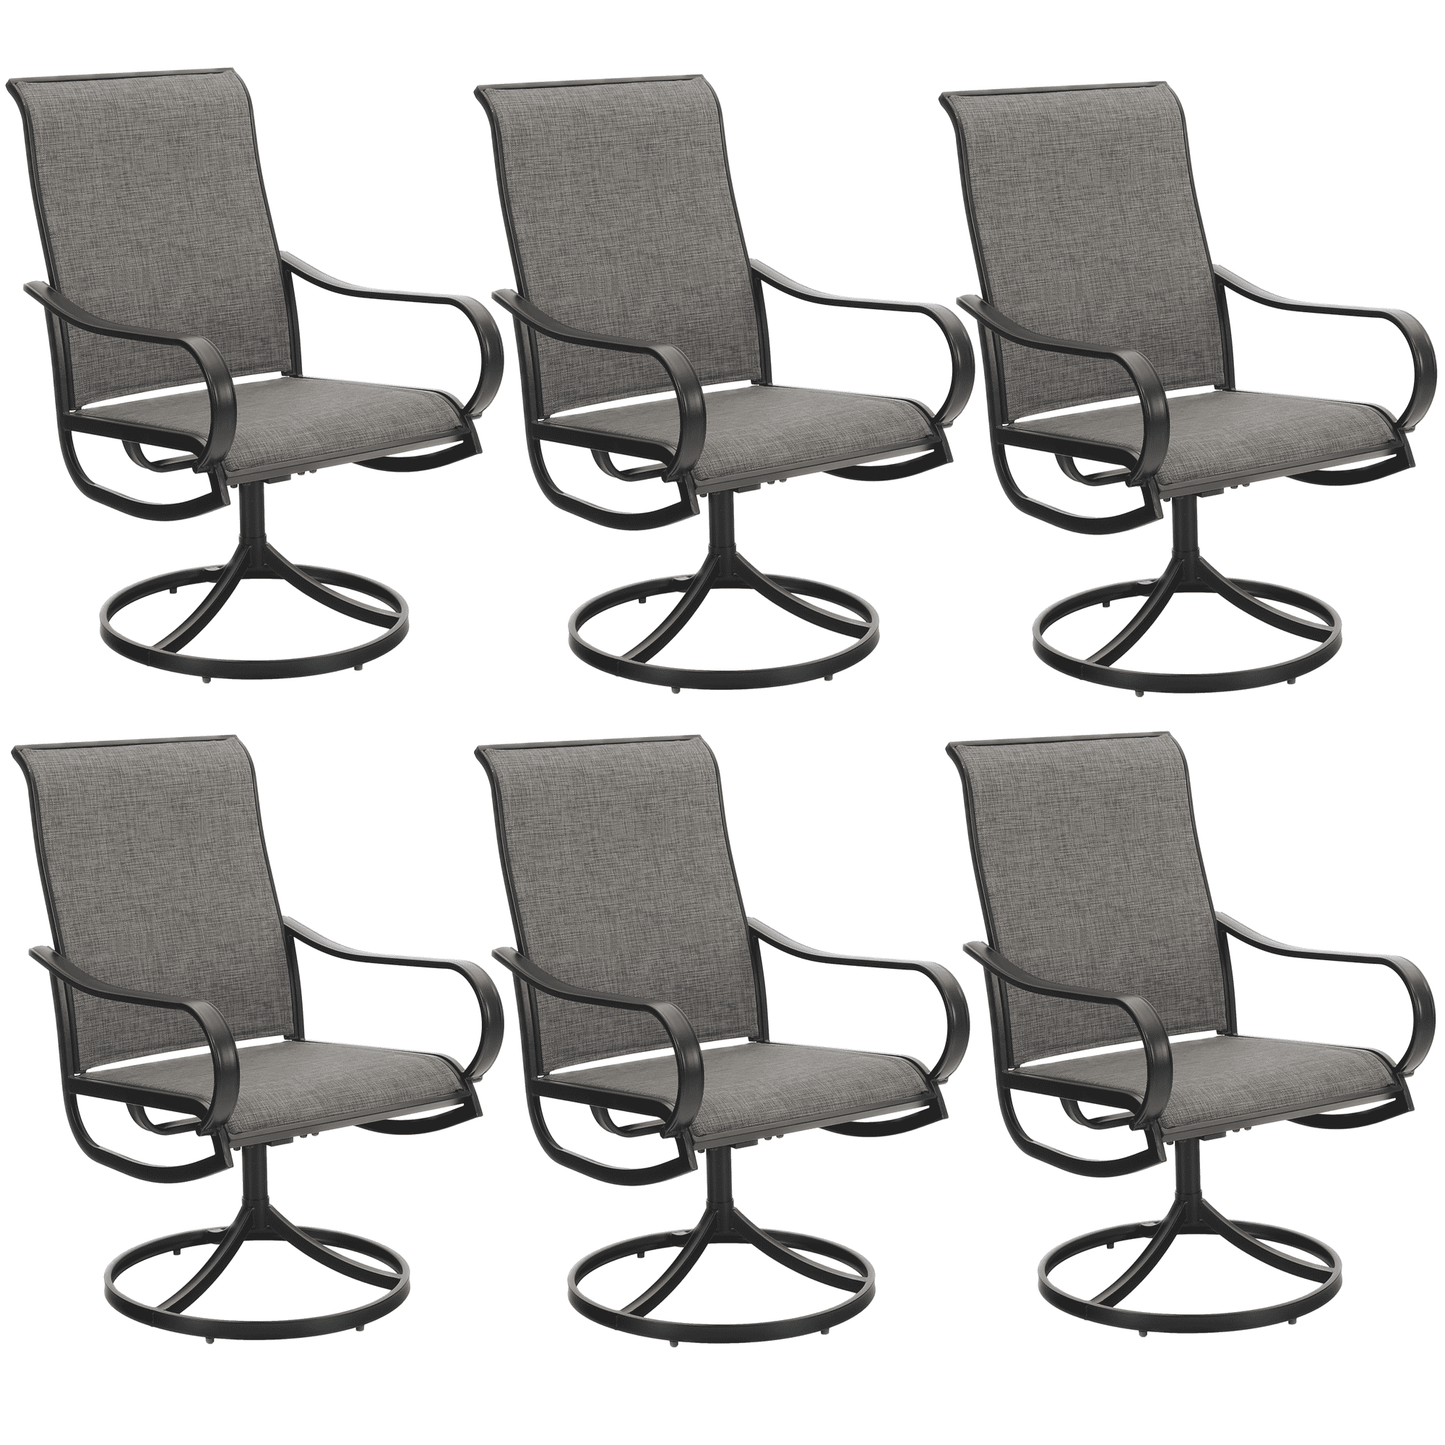 Sophia & William 6Pcs Patio Dining Swivel Chairs Set with Black Steel Frame